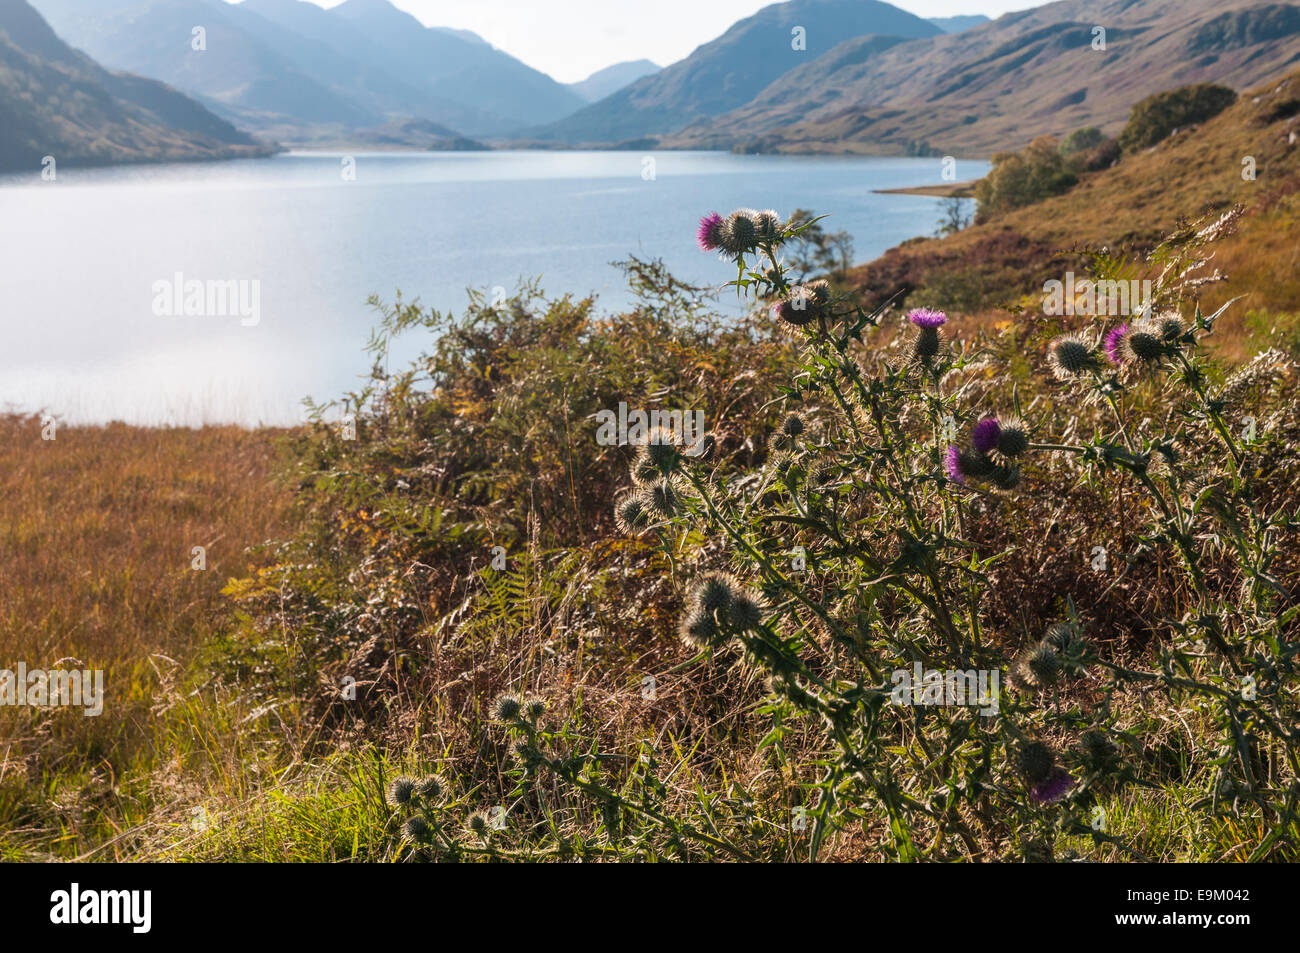 Scottish Thistles,Onopordum acanthium, in the foreground with Loch Quoich and the mountains of Knoydart in the background Stock Photo